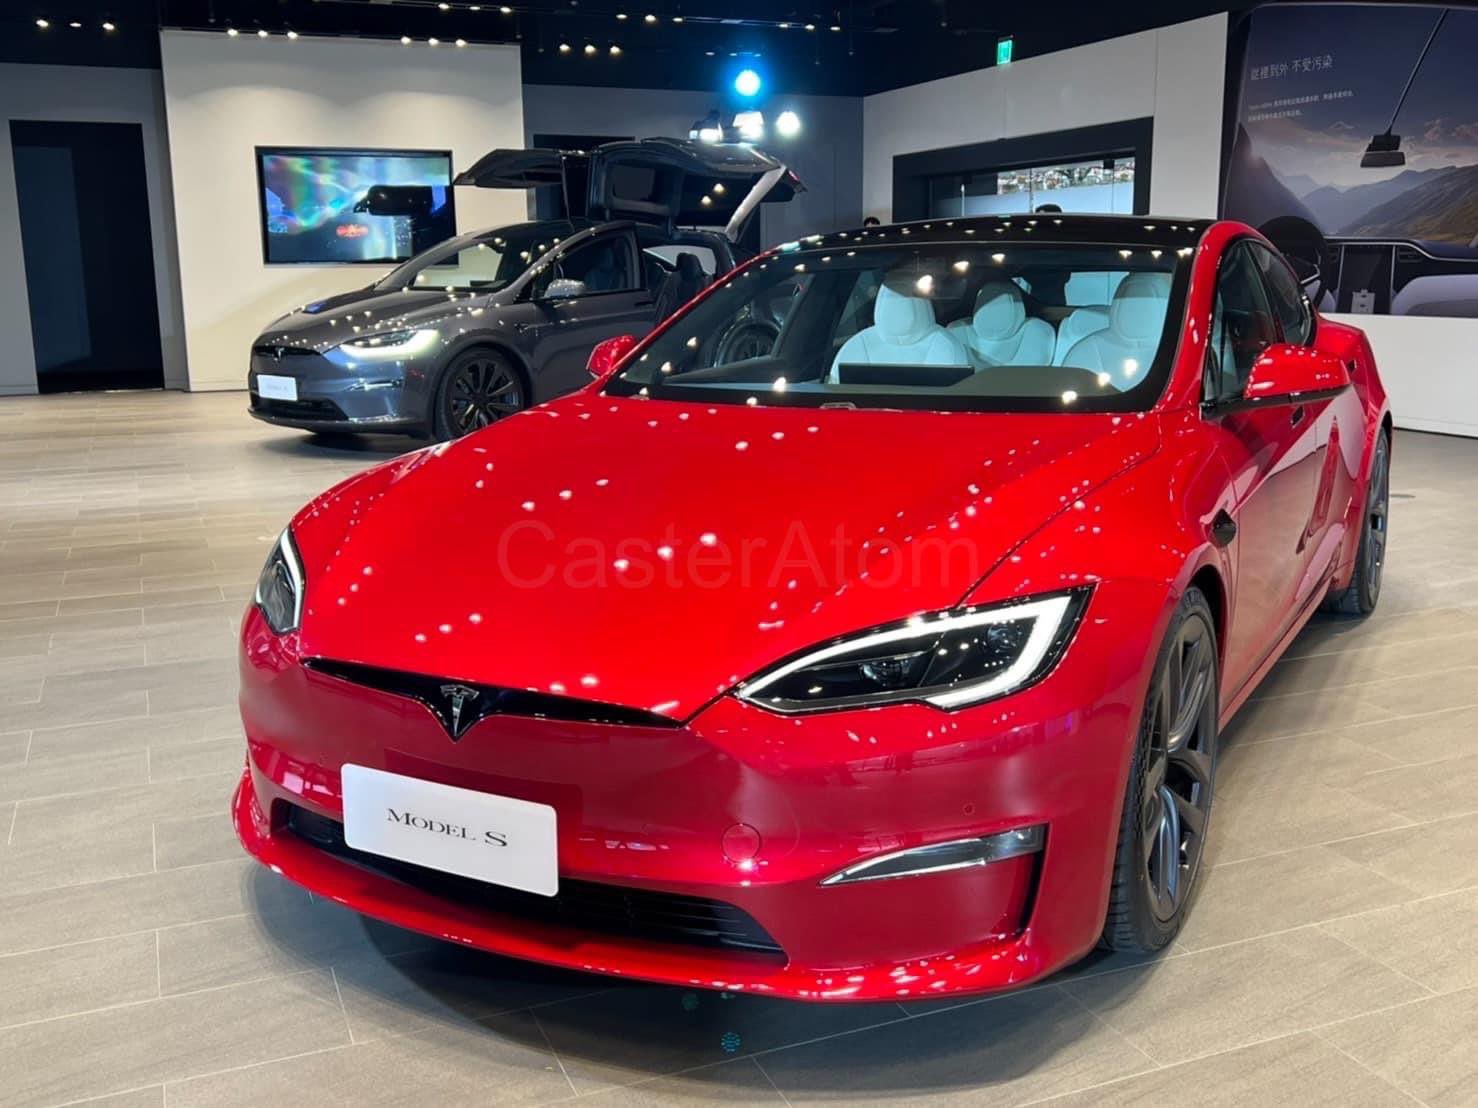 Updated Tesla S Breaks Cover In Asia With Revised Taillights And Headlamps | Carscoops